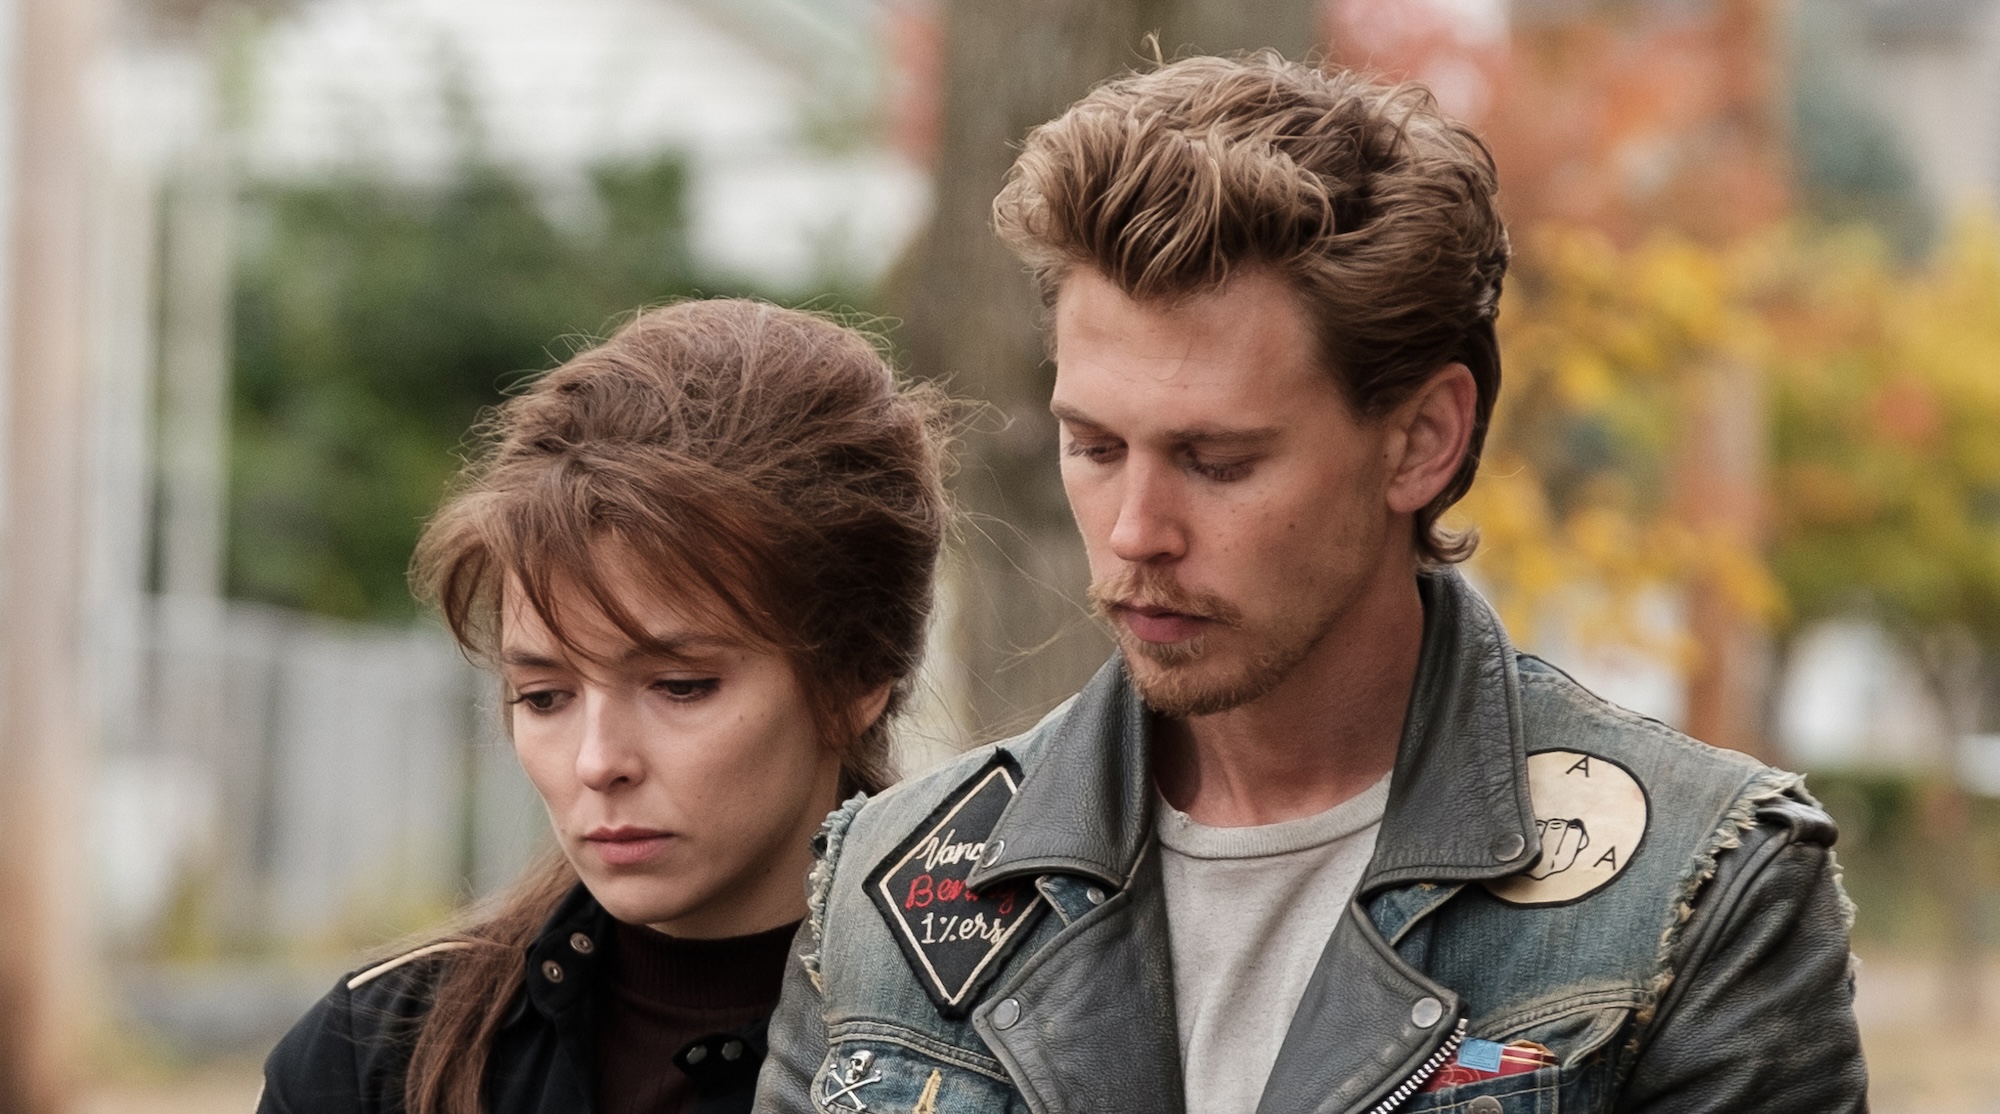 The Bikeriders Starring Austin Butler Set for VOD Release on July 9th